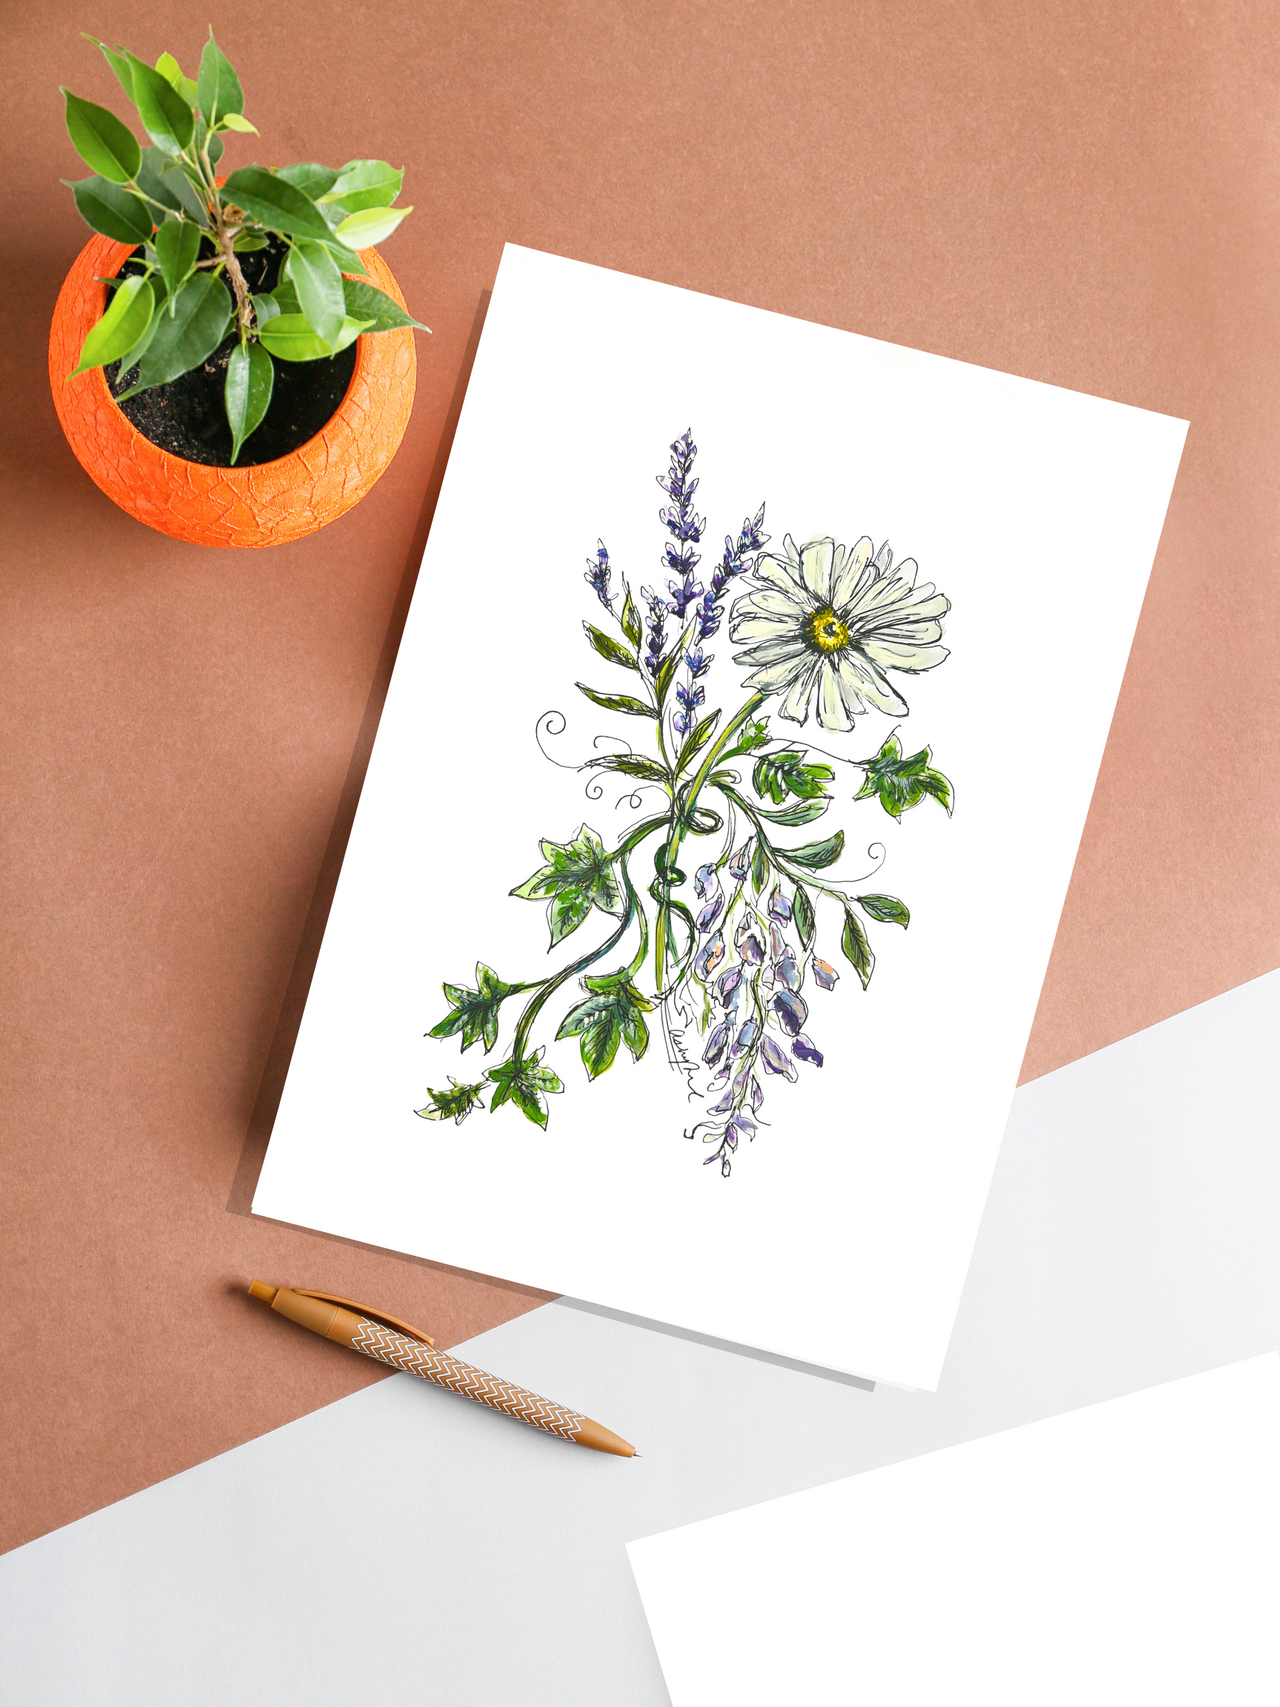 Taylor Swift Inspired Bouquet Watercolor - Original Art Print. Ivy, Wisteria, Daisy, Lavender